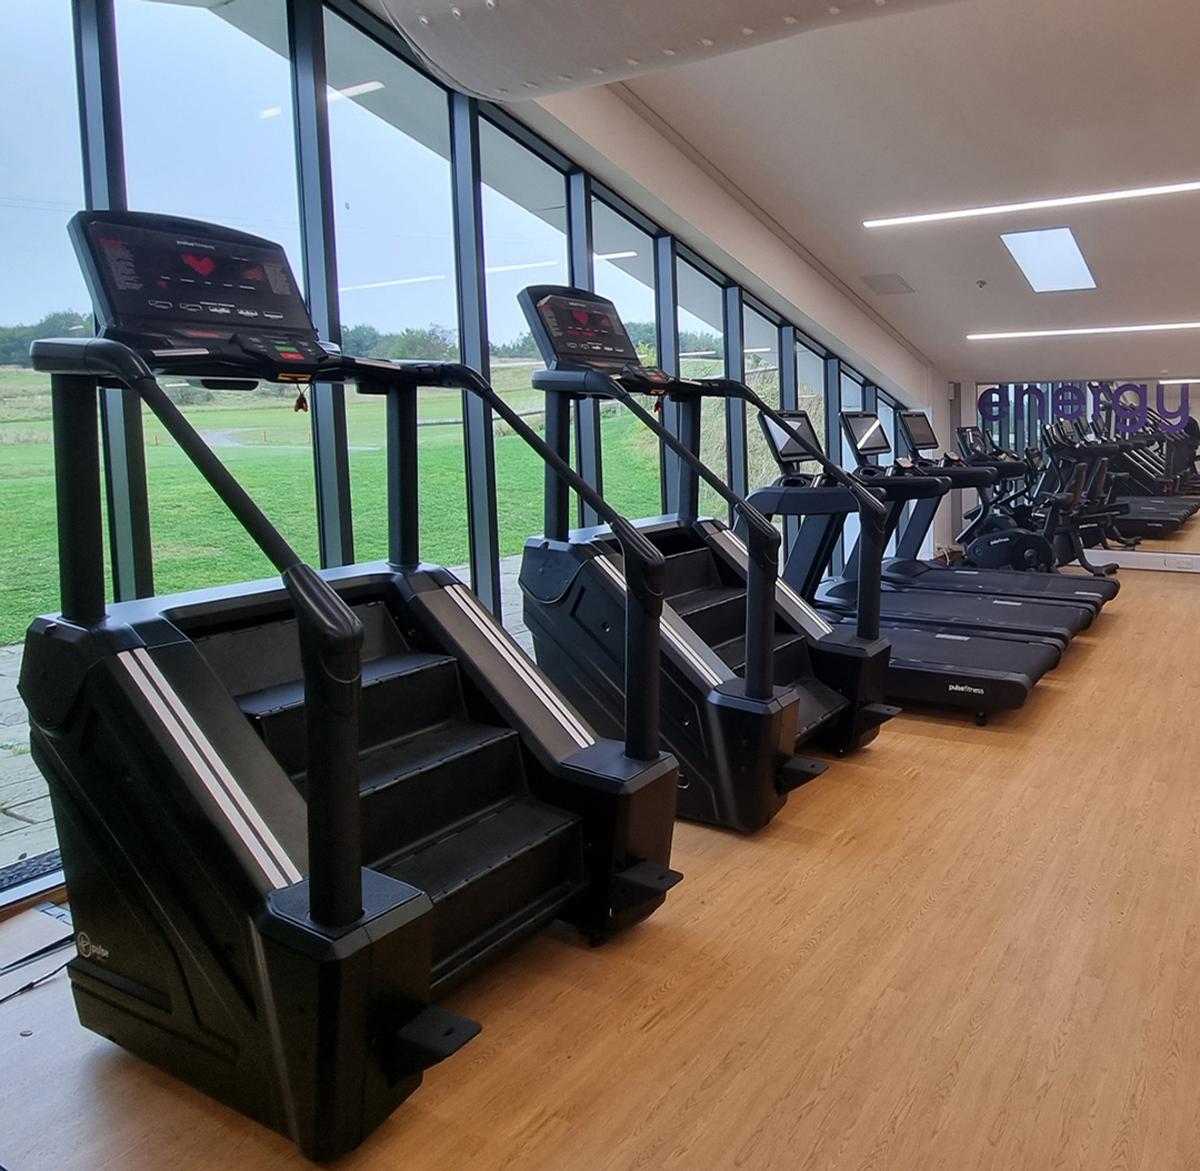 Pulse Fitness was awarded the contract due to its fully connected fitness offering